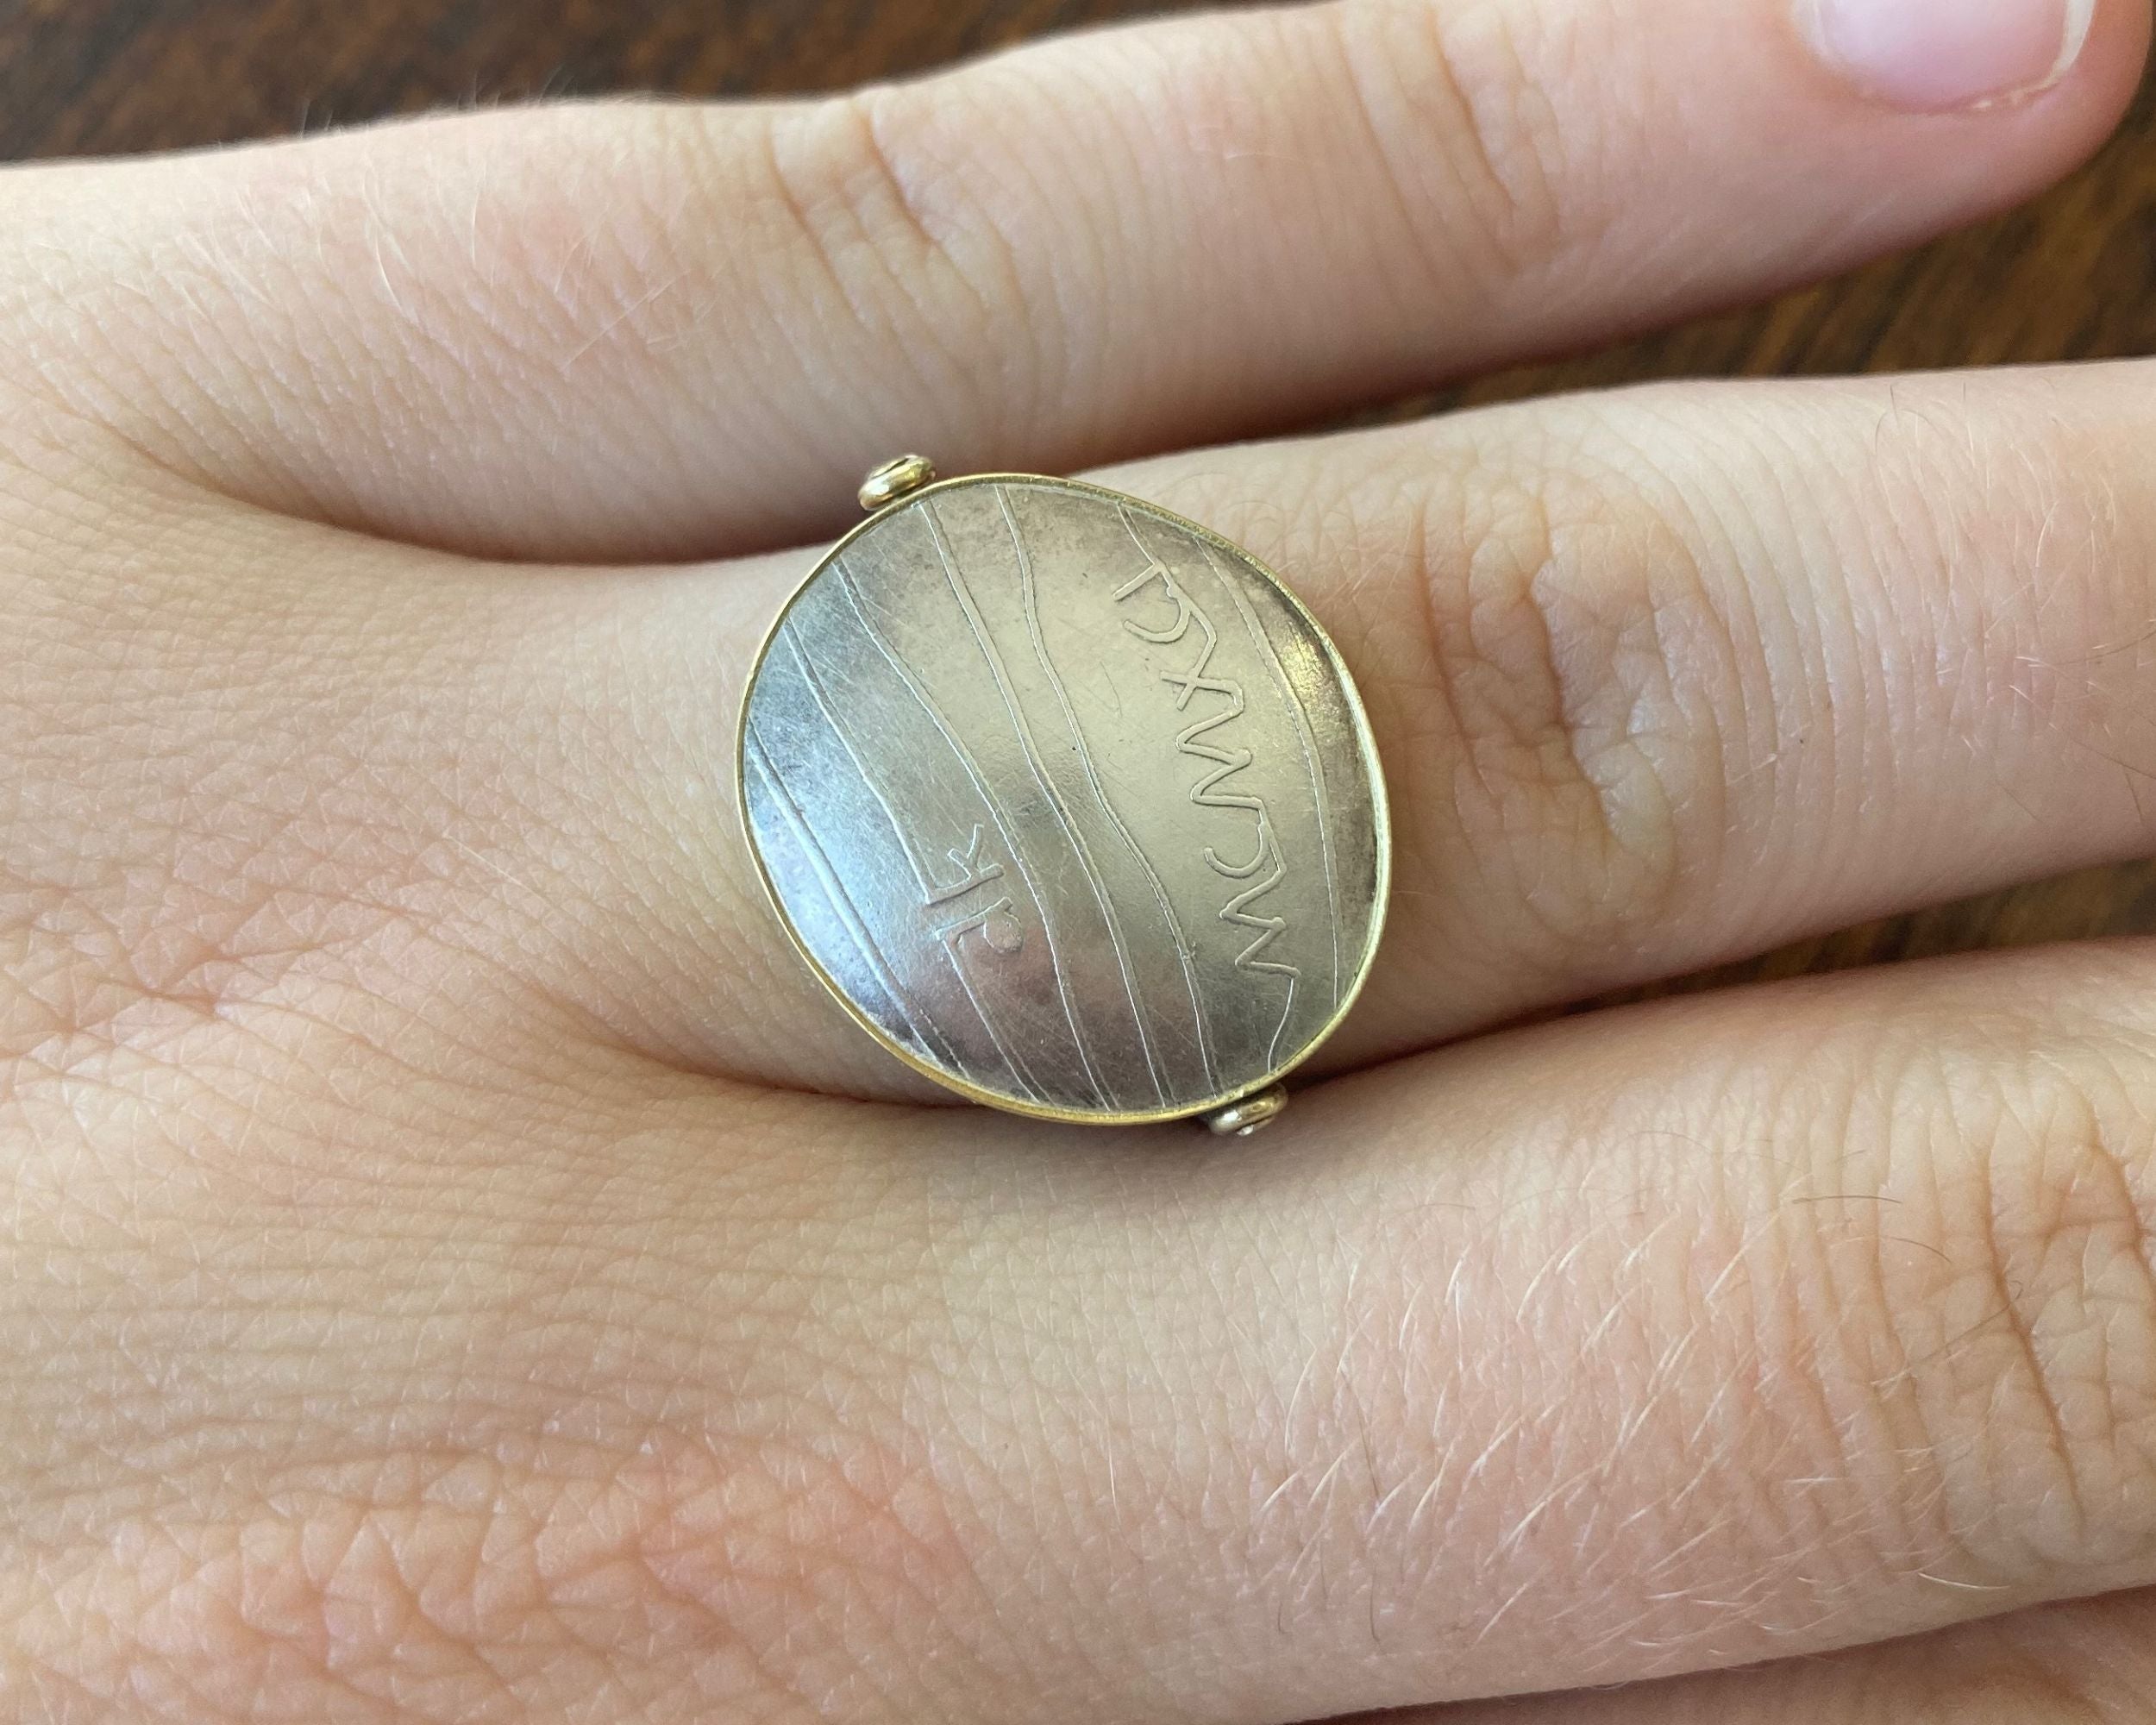 Germany Coin Ring German 2 Marks Handcrafted Rings From Coins Great for  Gift Deutschland Deutsch Mark Jewelry Souvenir - Etsy